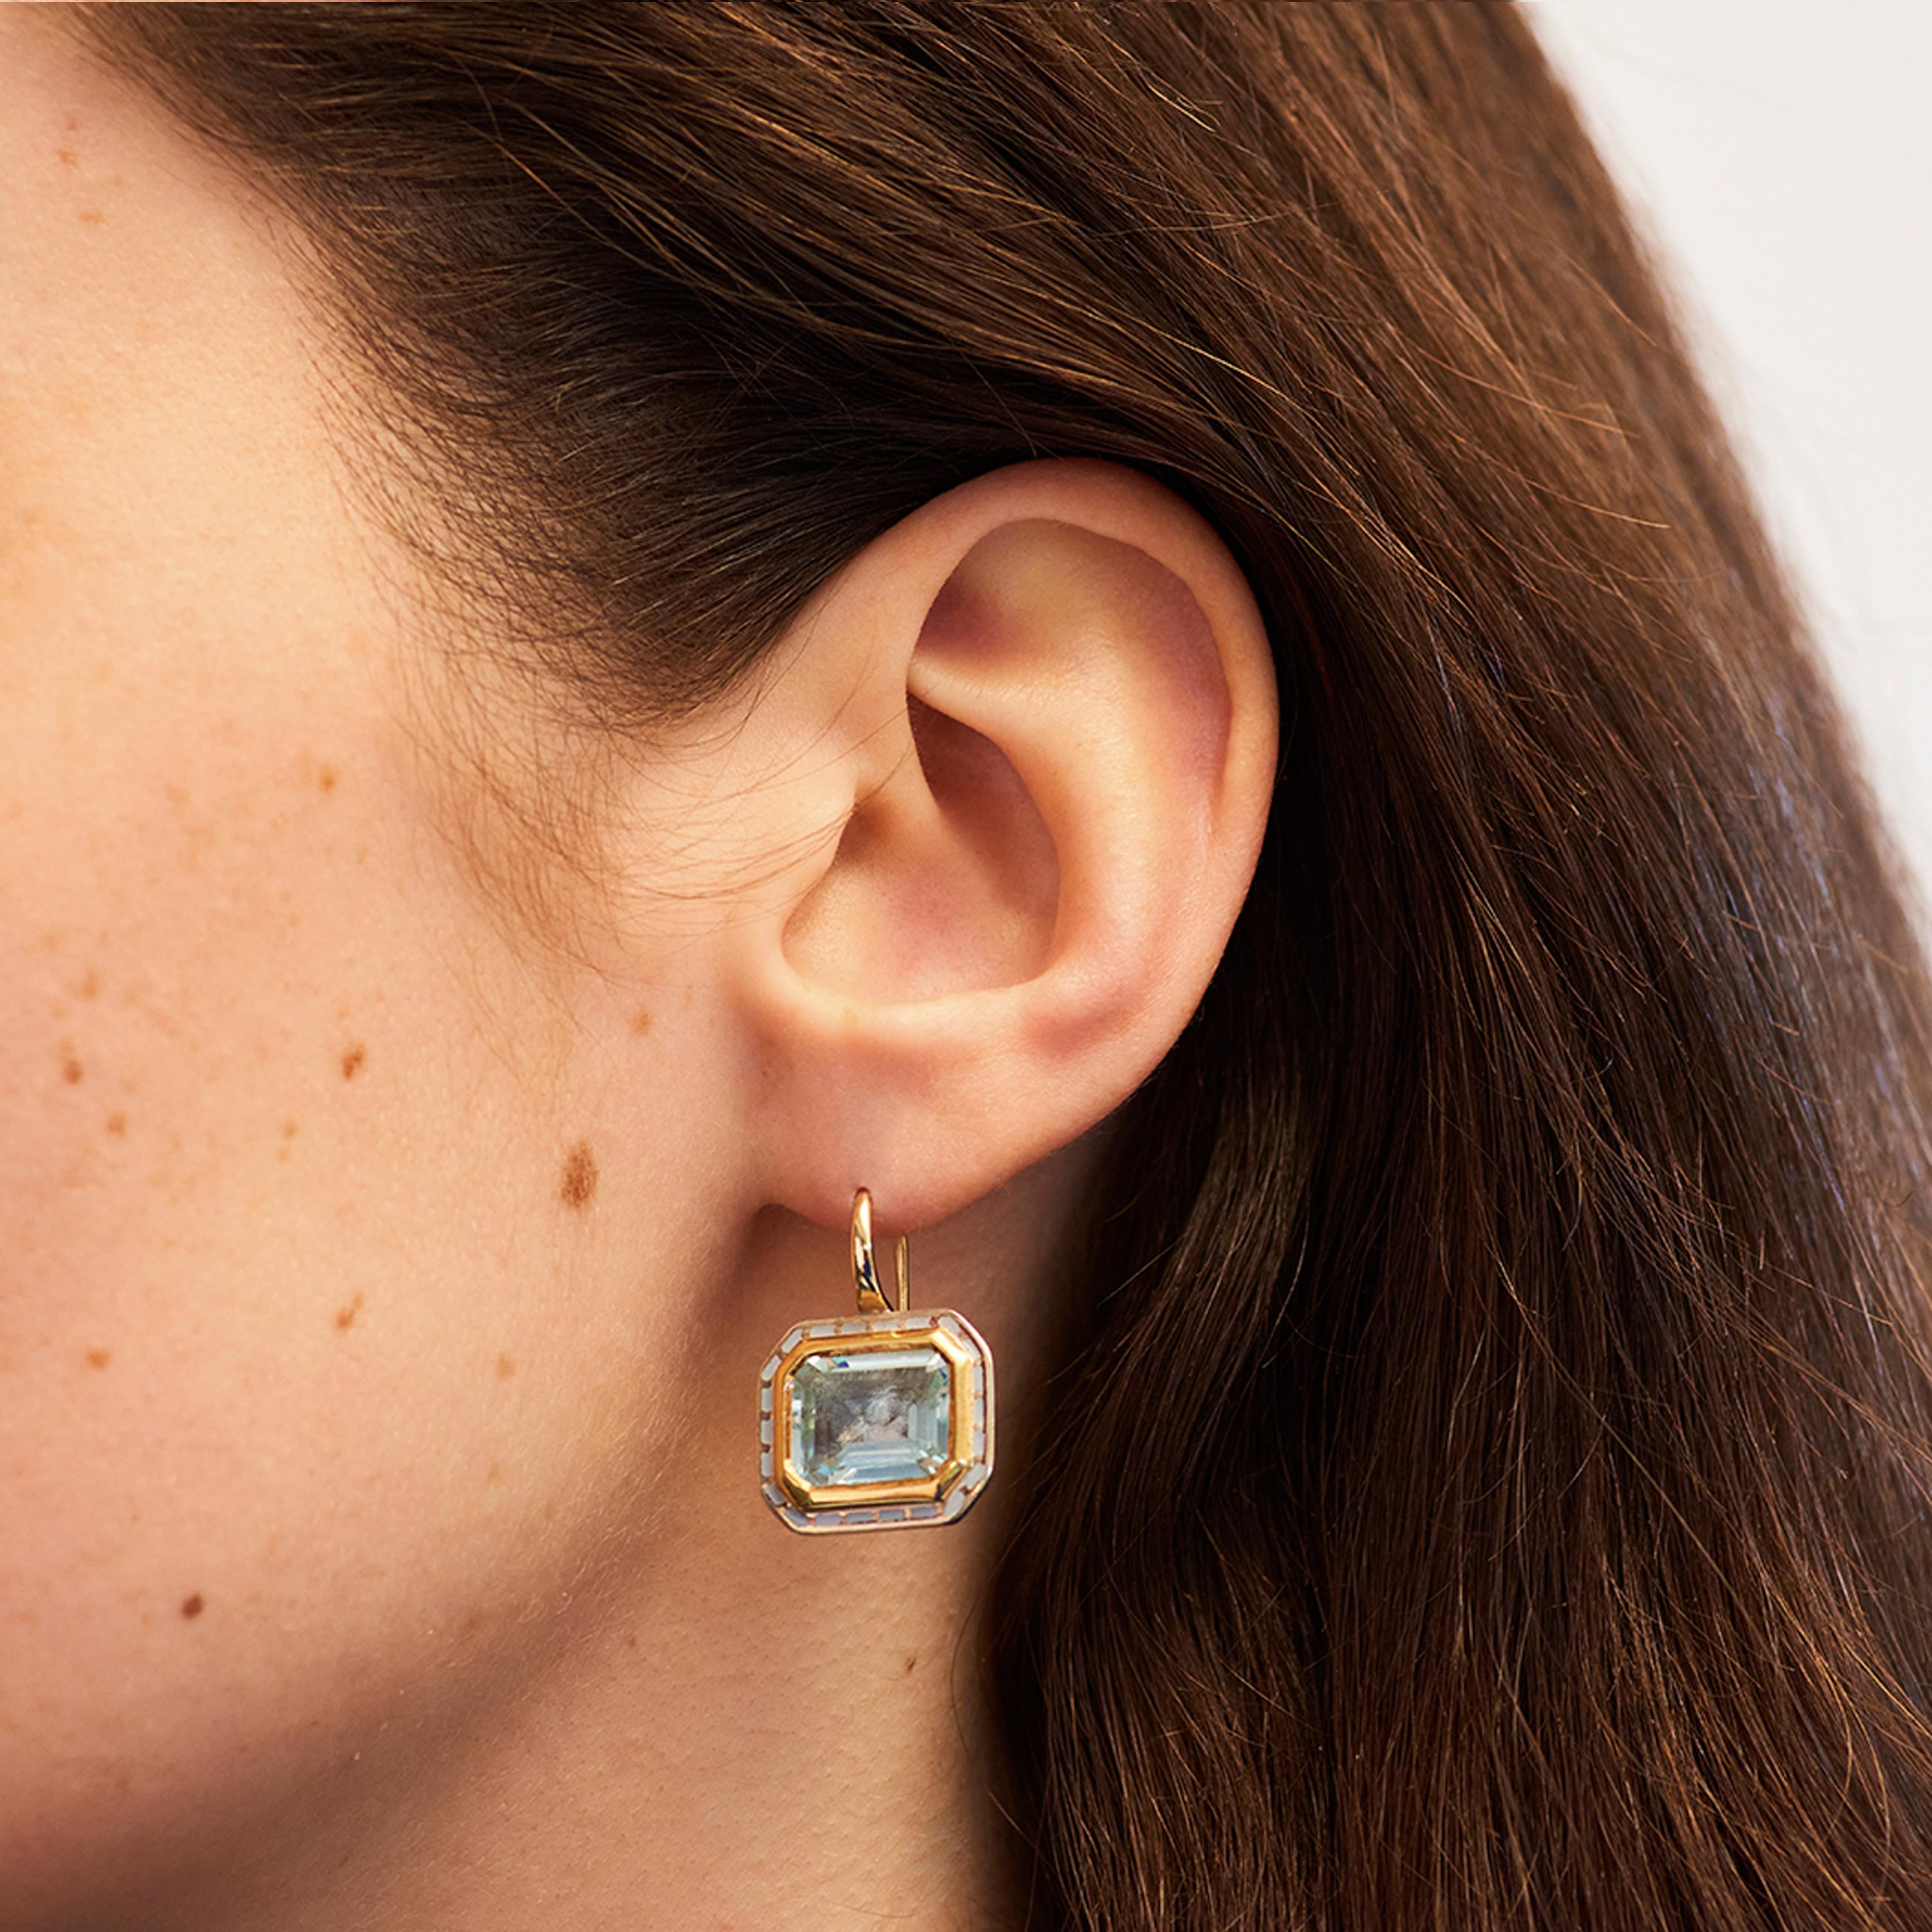 Alice Cicolini’s Silver Tile Emerald Cut earrings combine gold and sterling silver with lacquer enamel. The centre stone of each earring is set in 22 karat gold, surrounded by decorative lacquer enamel, which extends to adorn back of the earring.